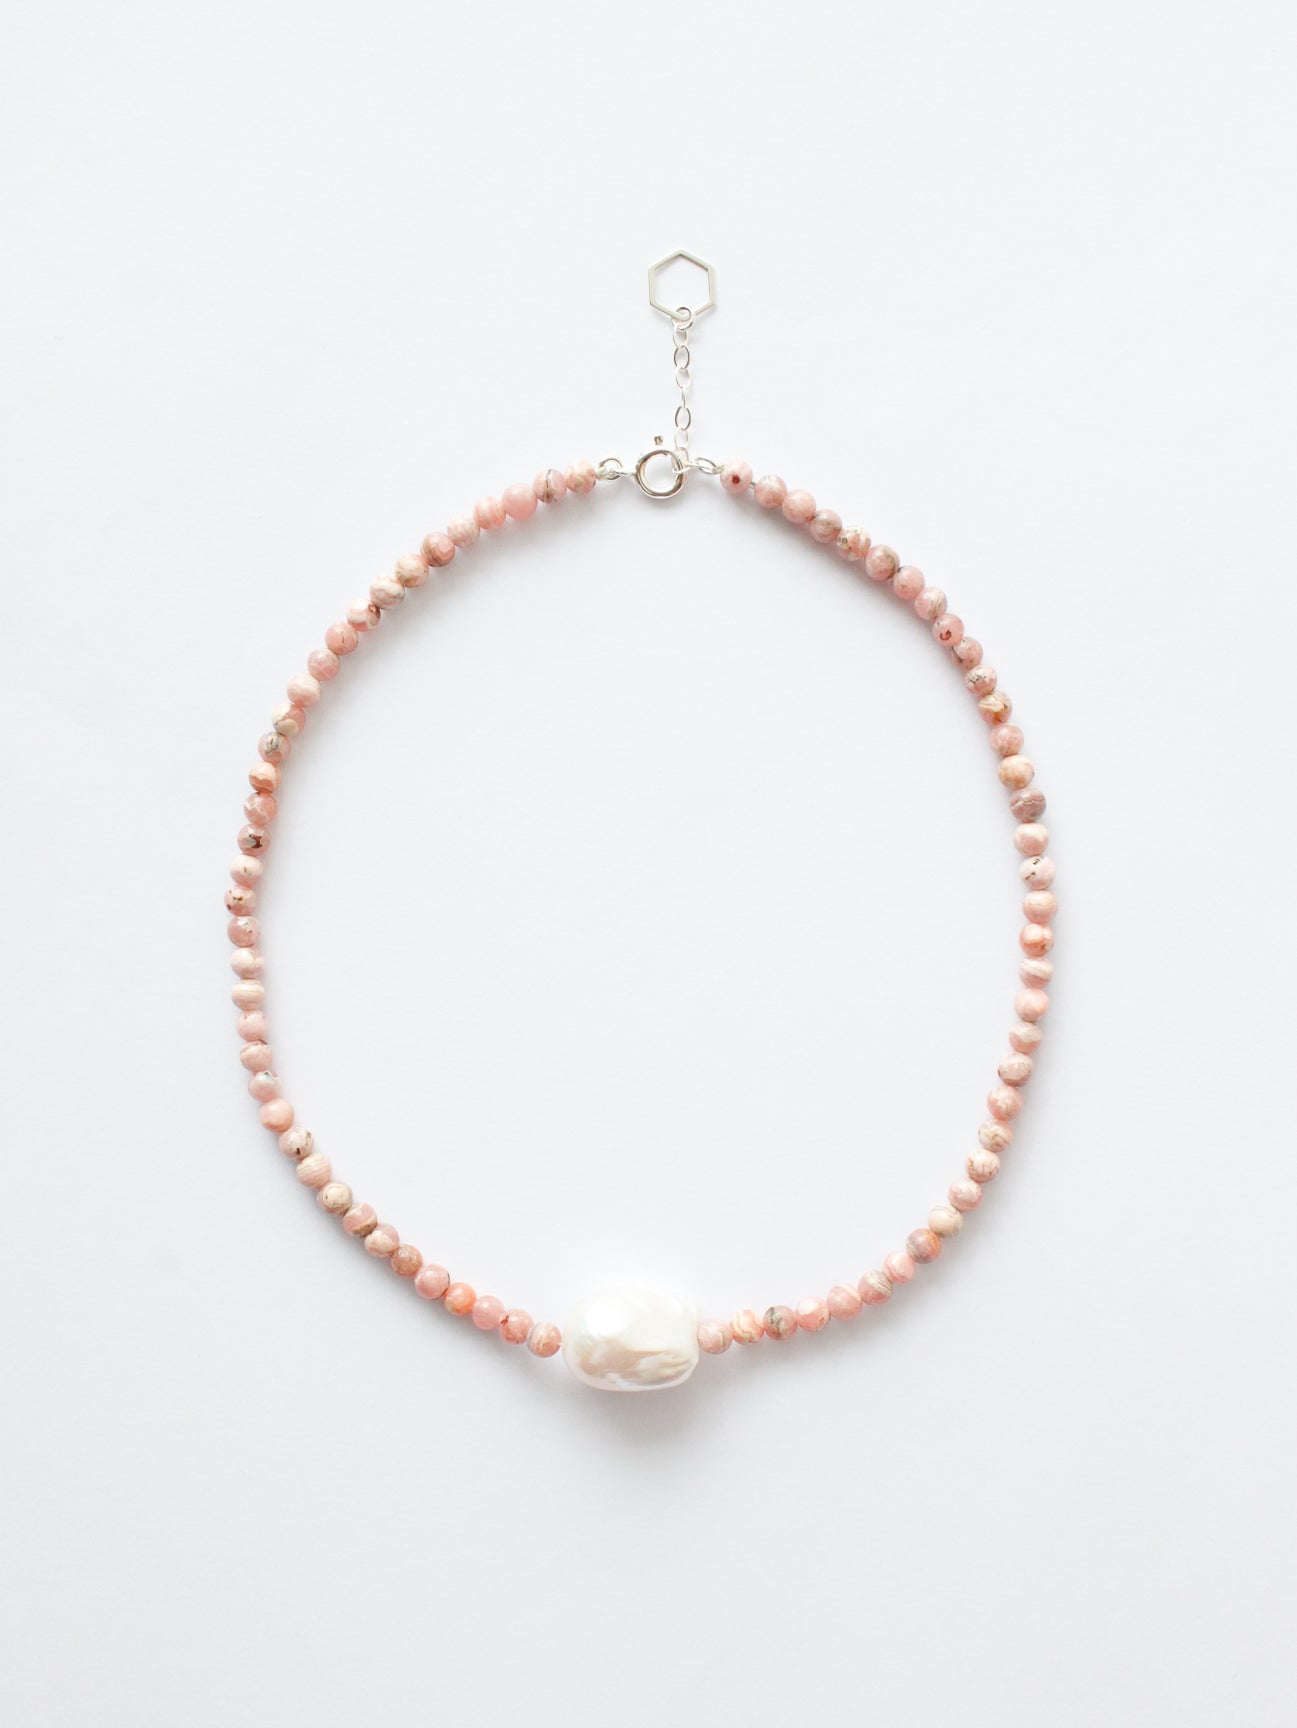 Stone Necklace - Rhodocrosite with Baroque Pearl